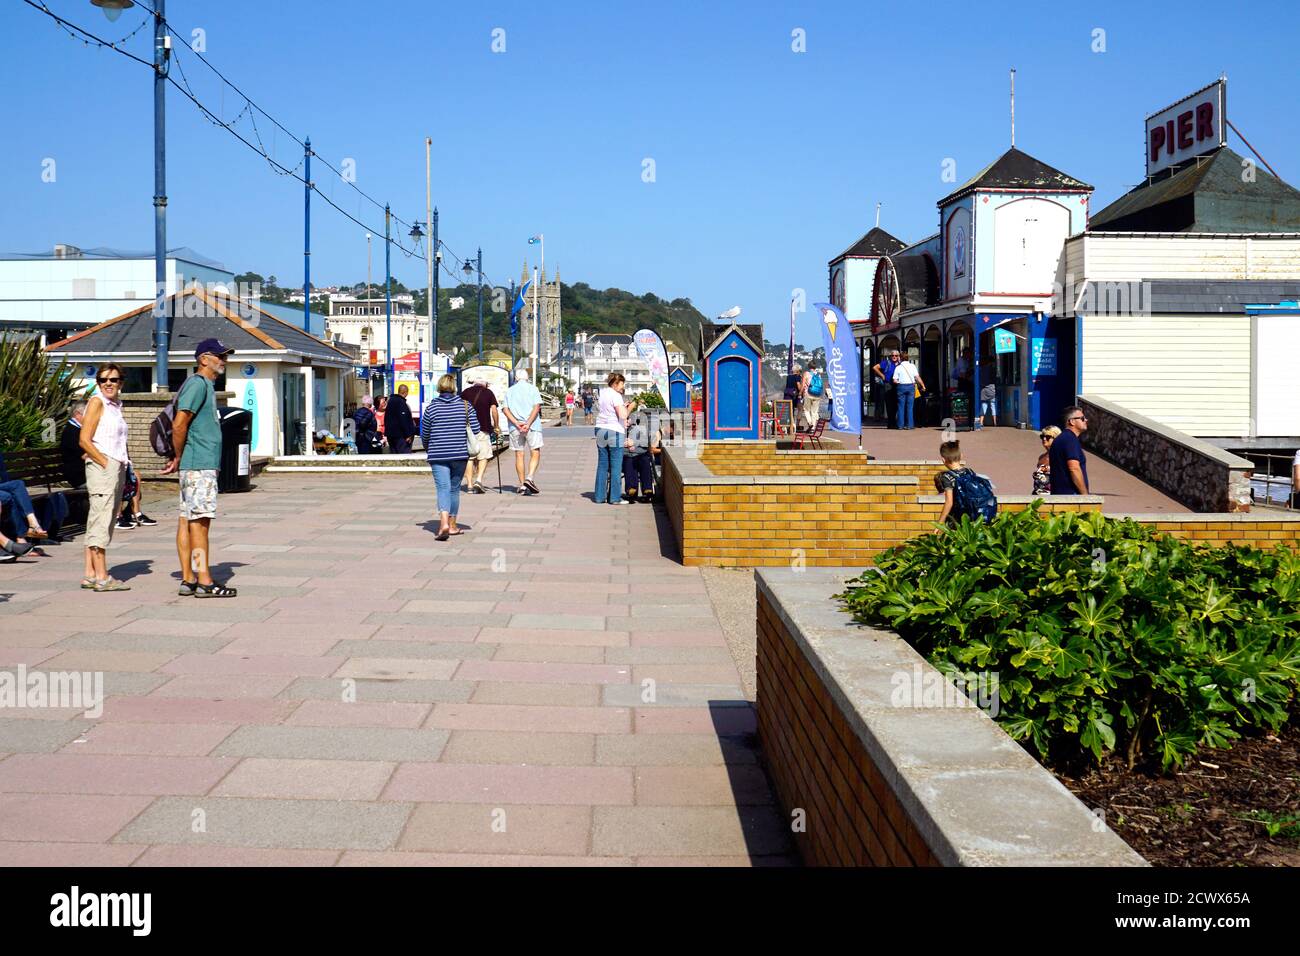 Teignmouth, Devon, UK. September 17, 2020.  Tourists and holidaymakers enjoying the promenade in front of the pier at Teignmouth in Devon, UK. Stock Photo